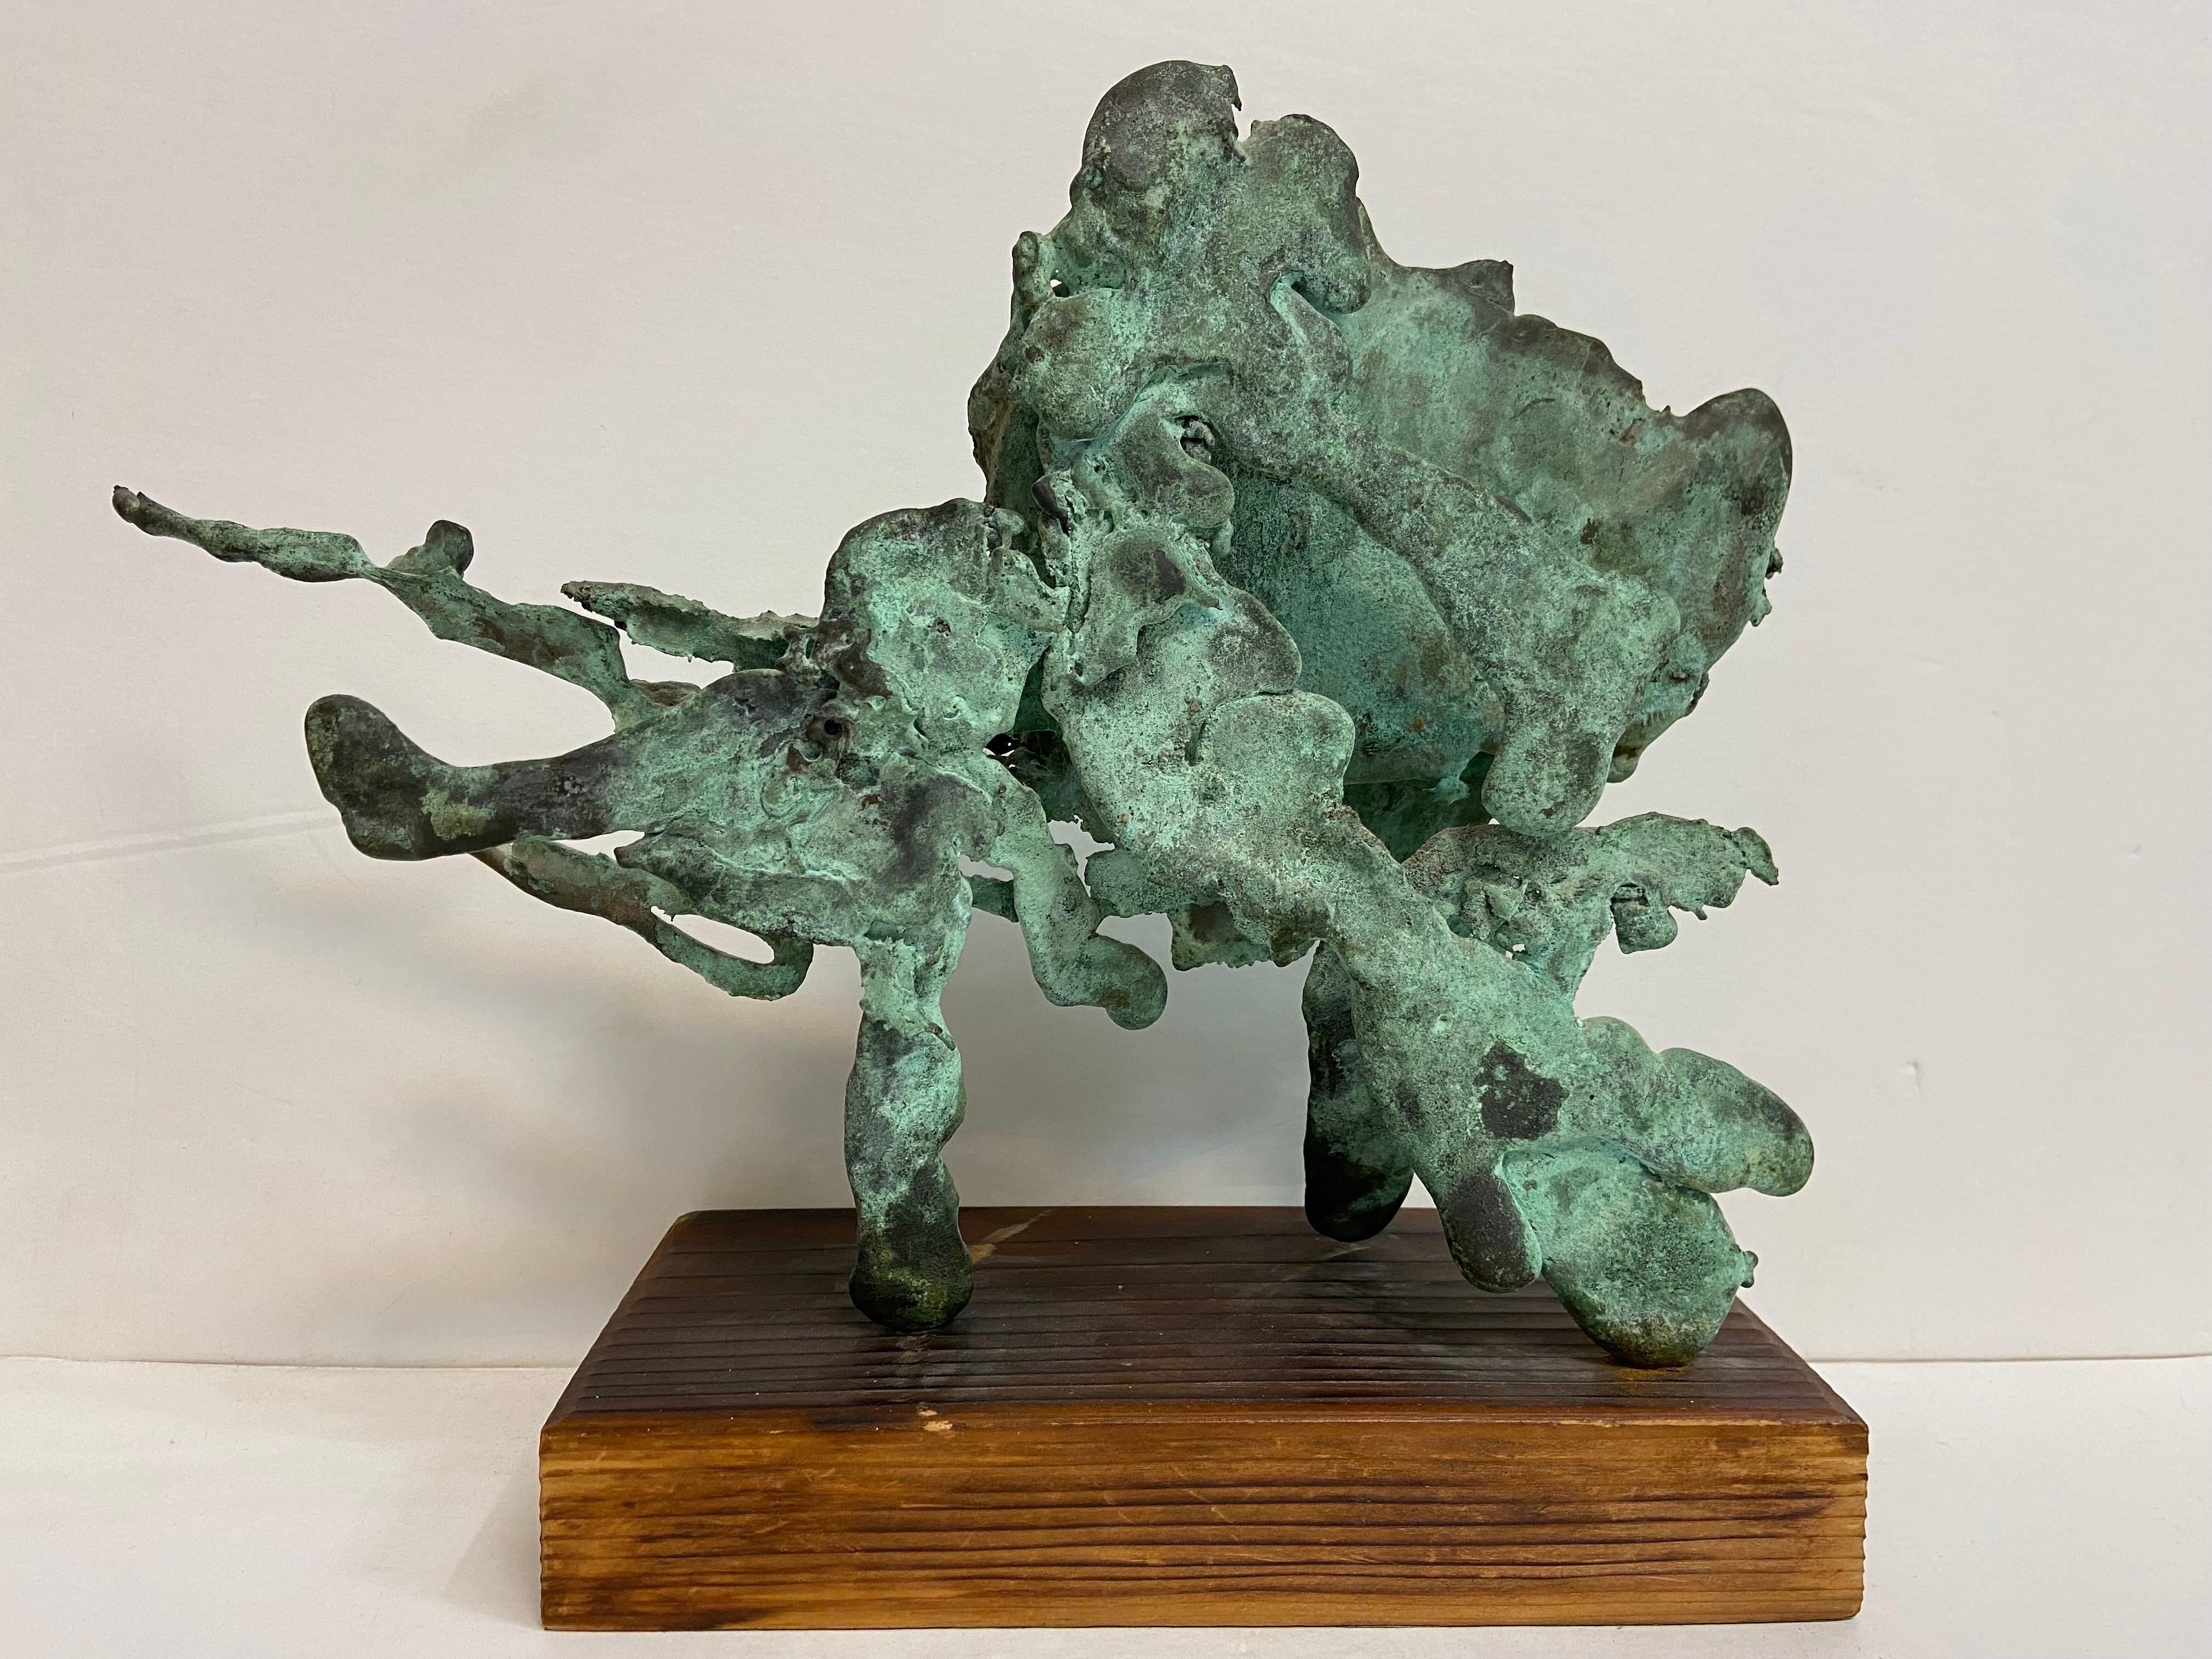 A vintage, circa 1960's, large spill cast bronze brutalist style sculpture with verdigris patina on a wood base. The process of the casting evokes a feeling of movement and freedom, captured in a moment. The wood base itself measures approximately